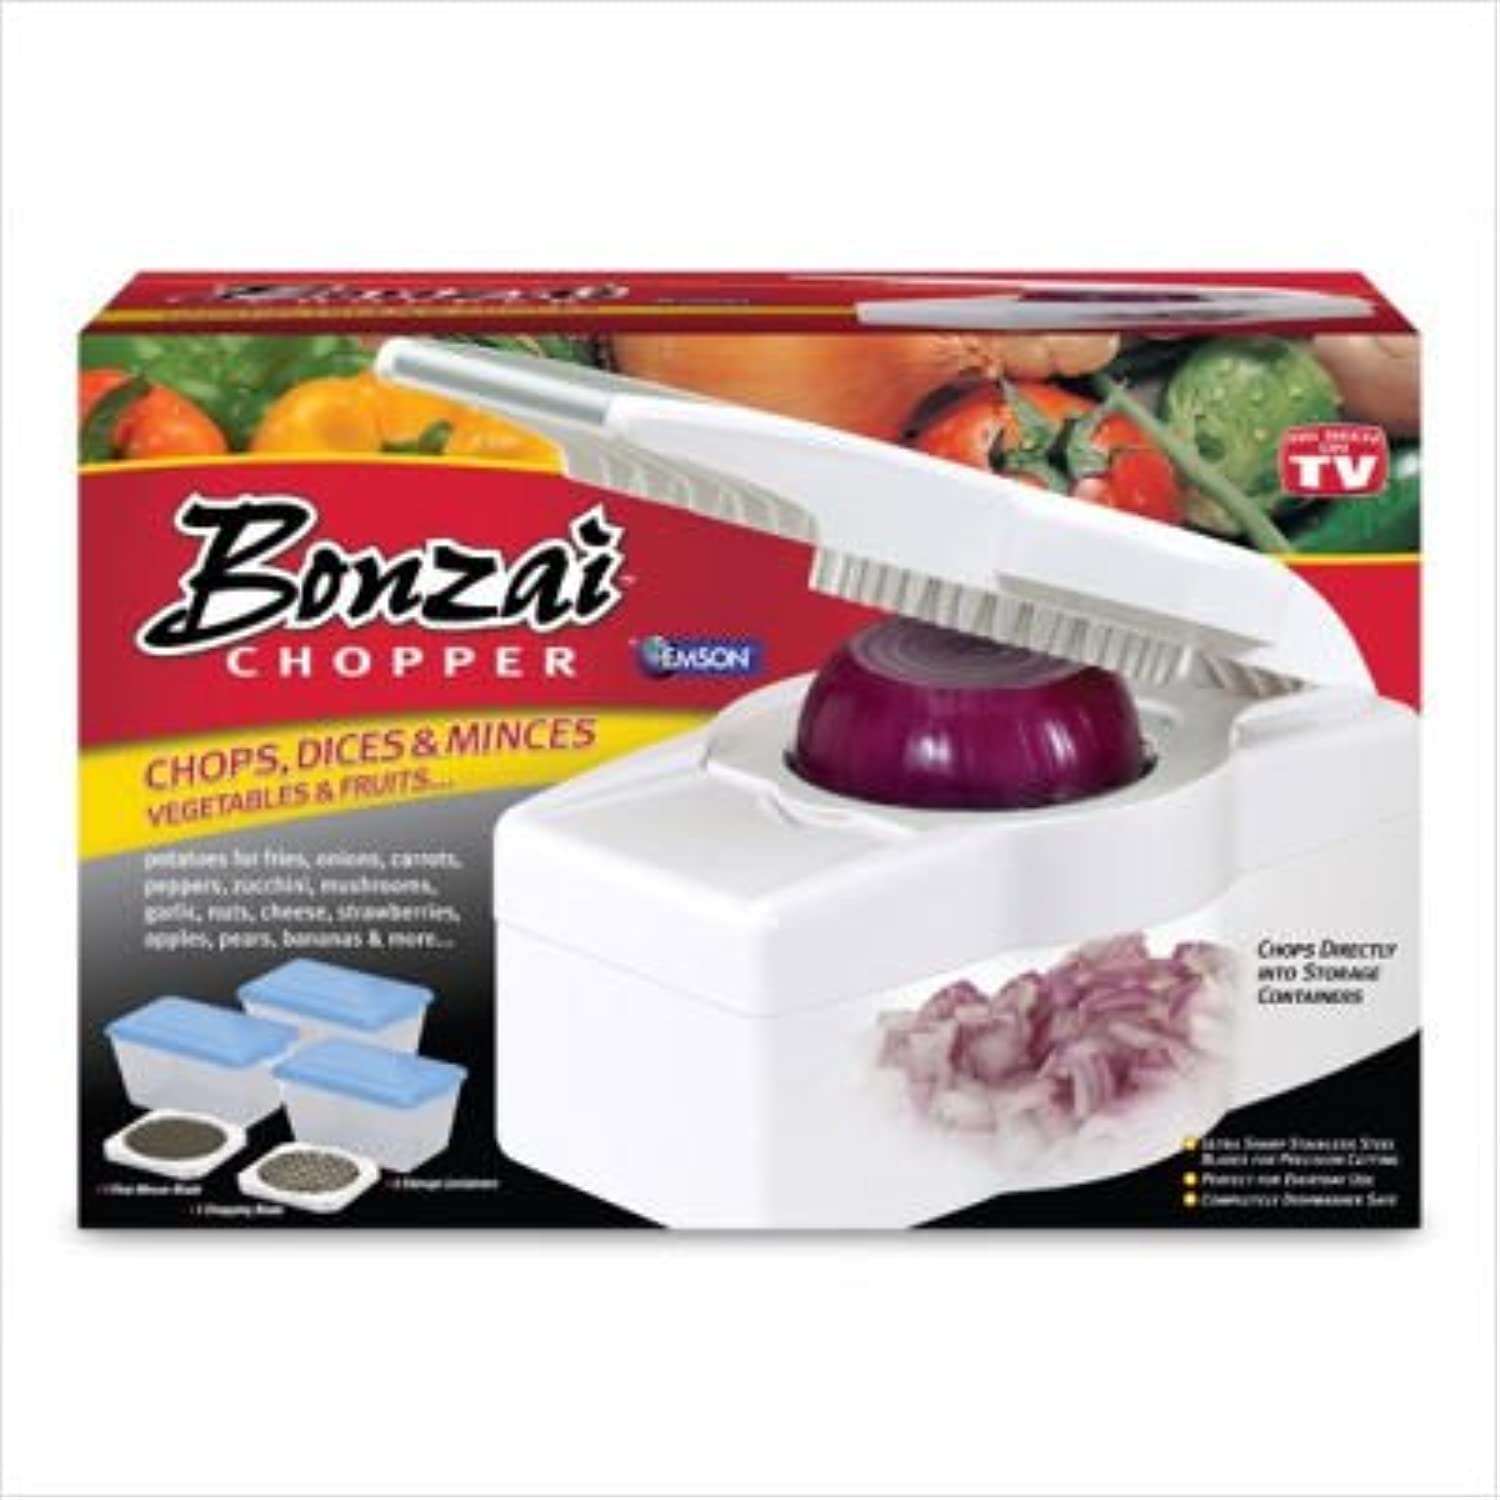 Bonzai Chopper Vegetable and Fruit Chopper, 2 Blades and 3 Storage Containers Included